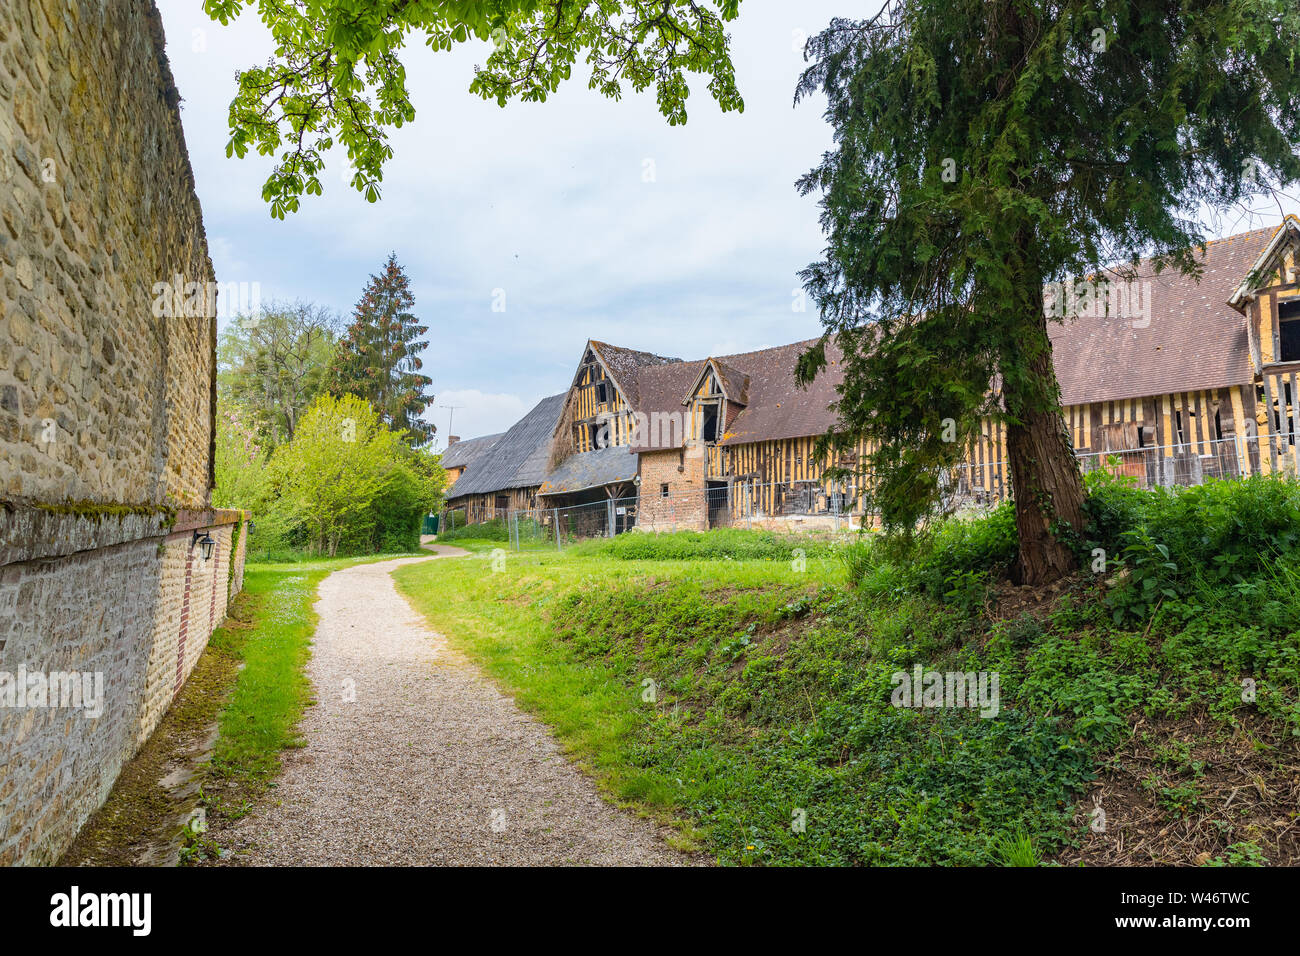 Saint Germain de Livet Château   wall with half timbered house in the background, France Stock Photo